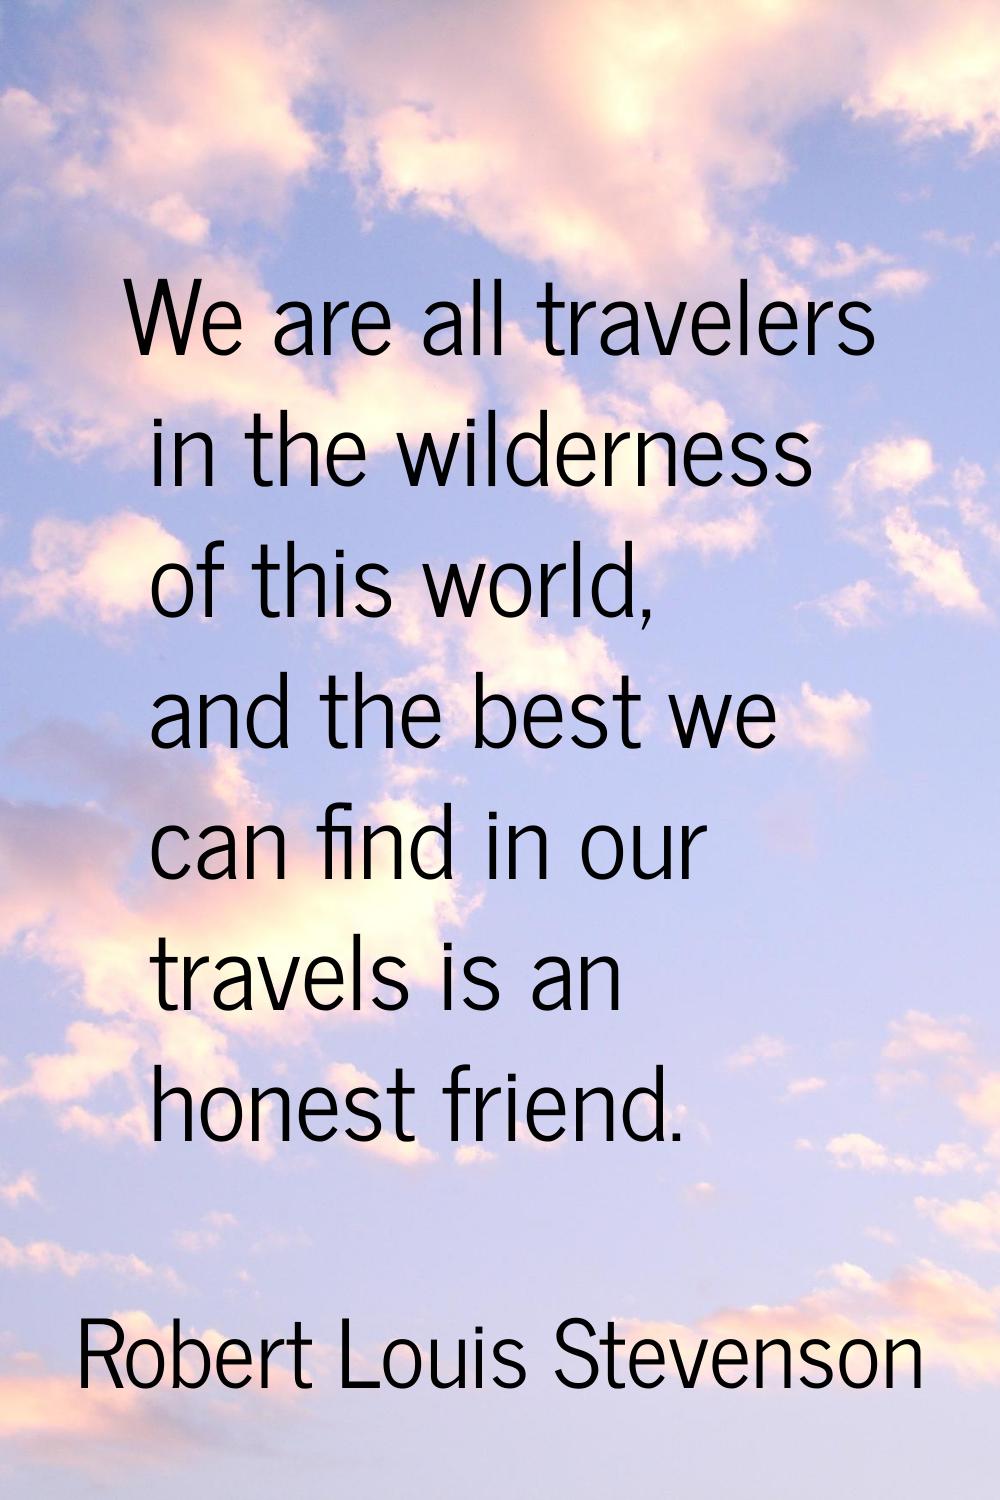 We are all travelers in the wilderness of this world, and the best we can find in our travels is an